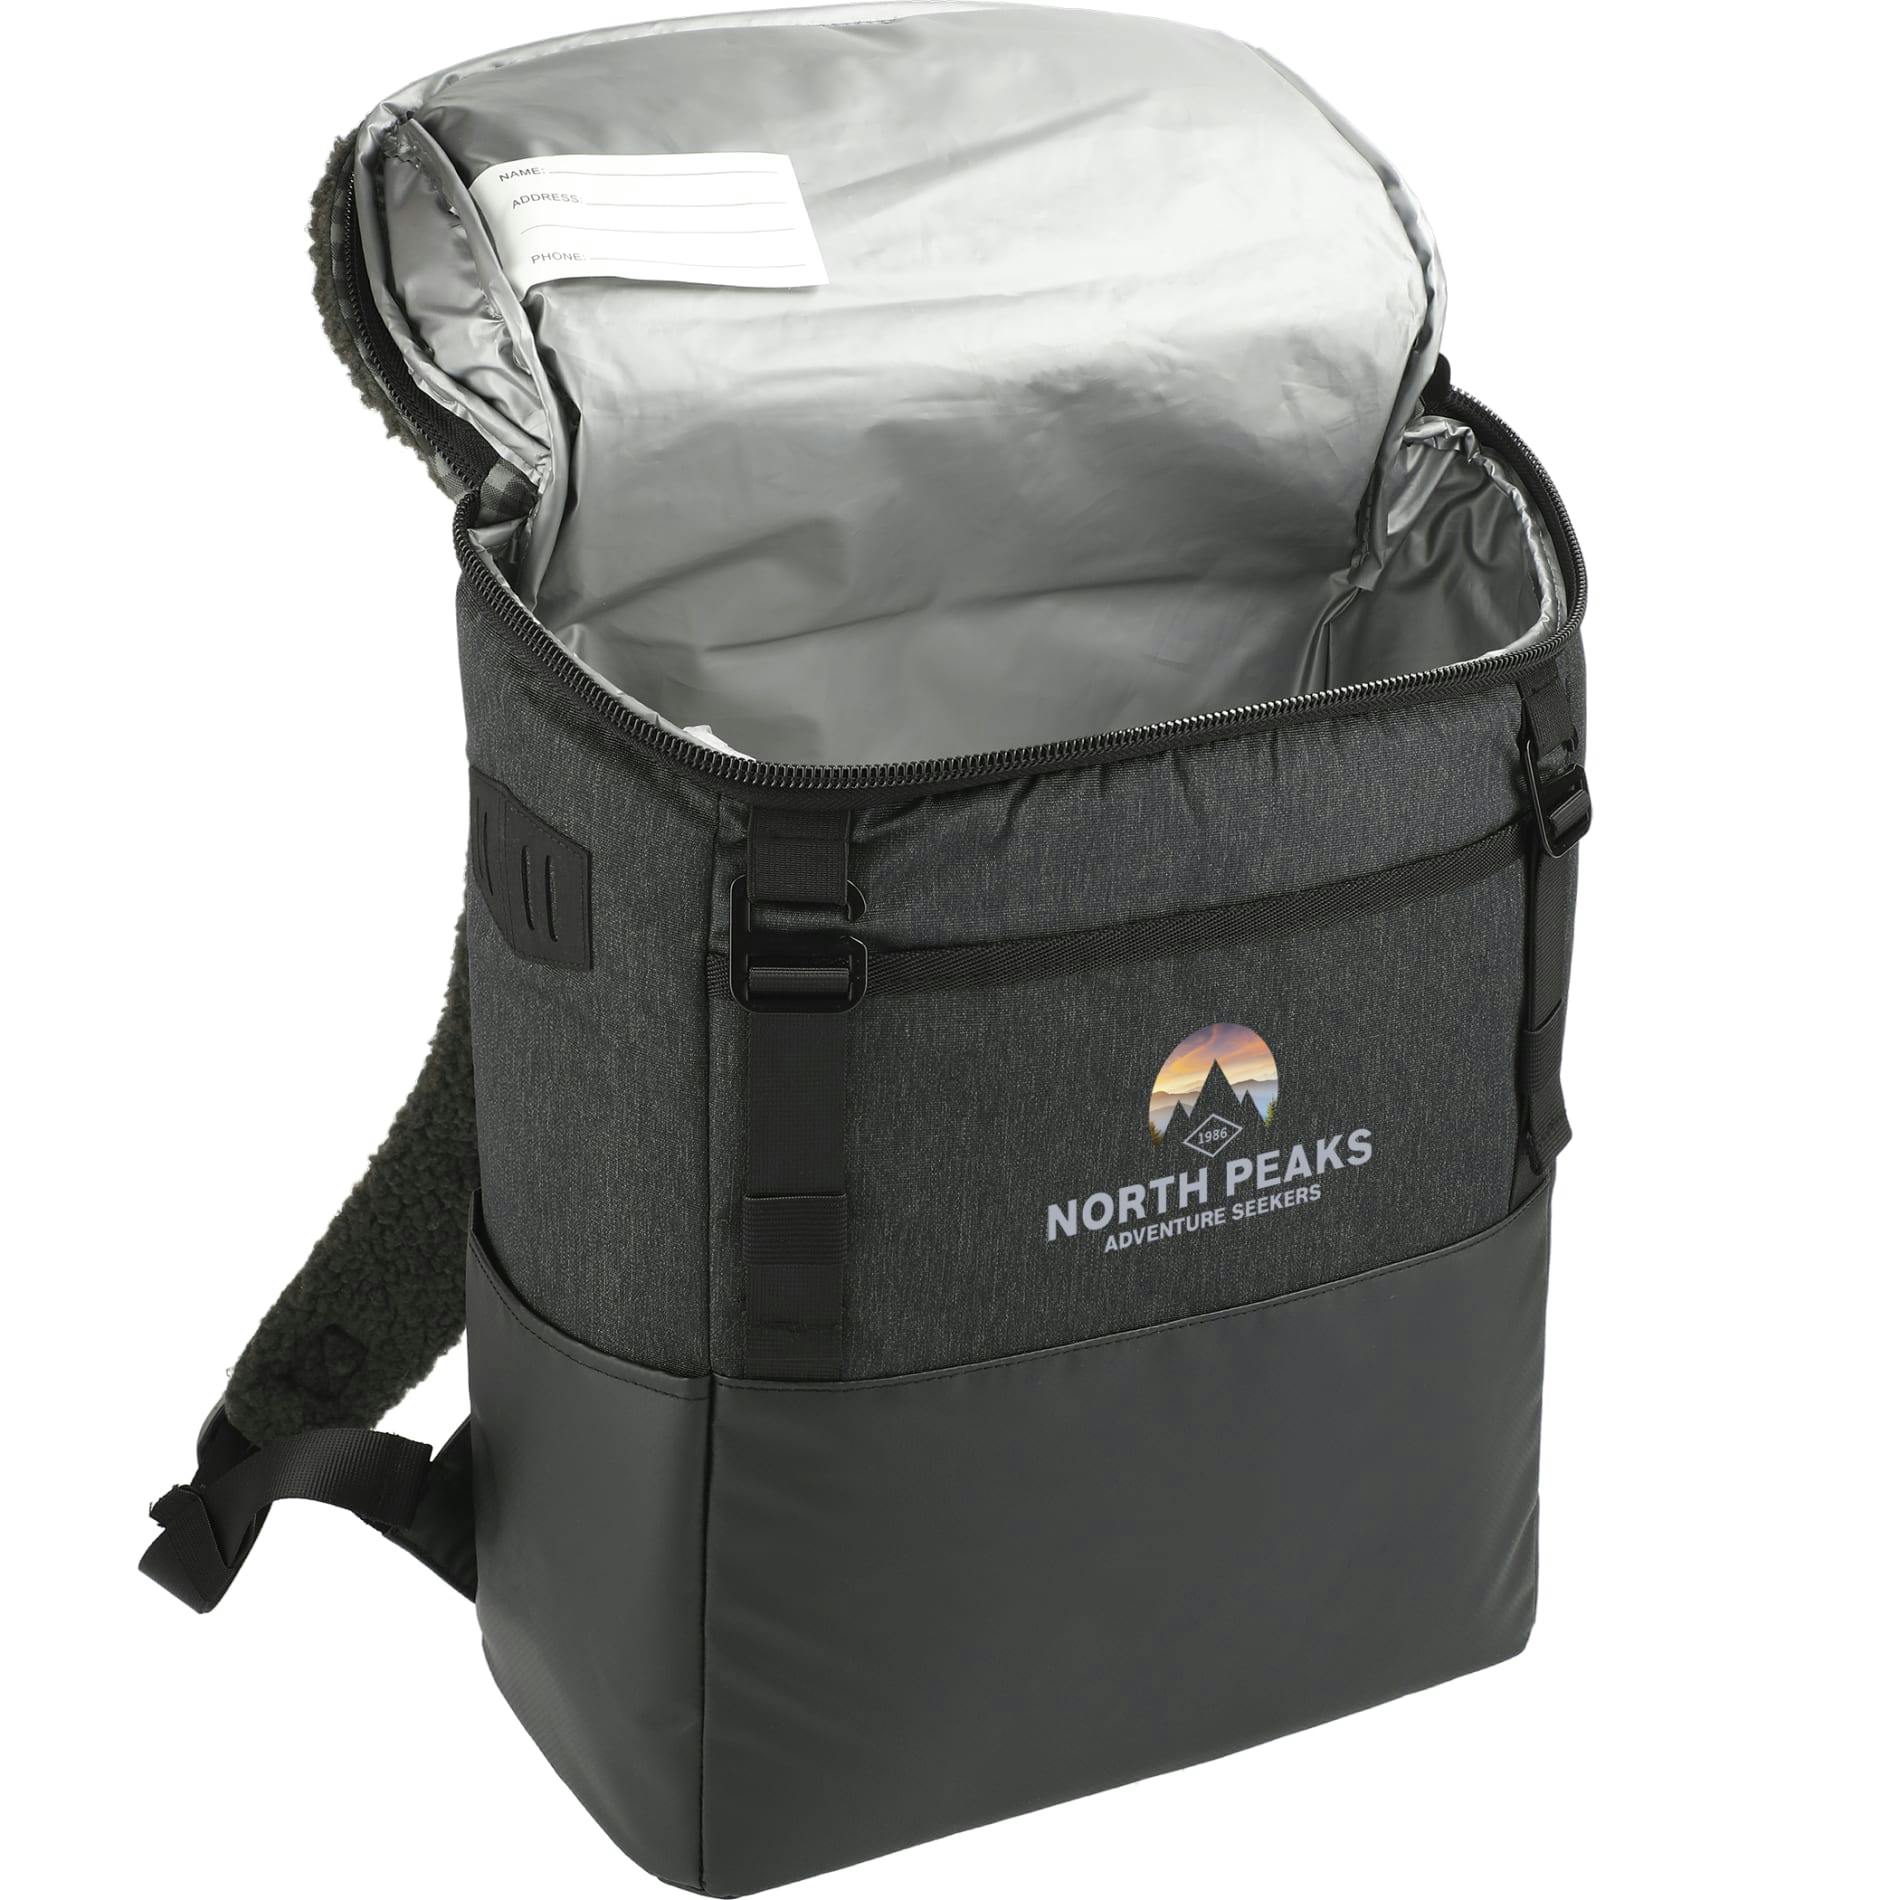 Field & Co. Fireside Eco 12 Can Backpack Cooler - additional Image 1